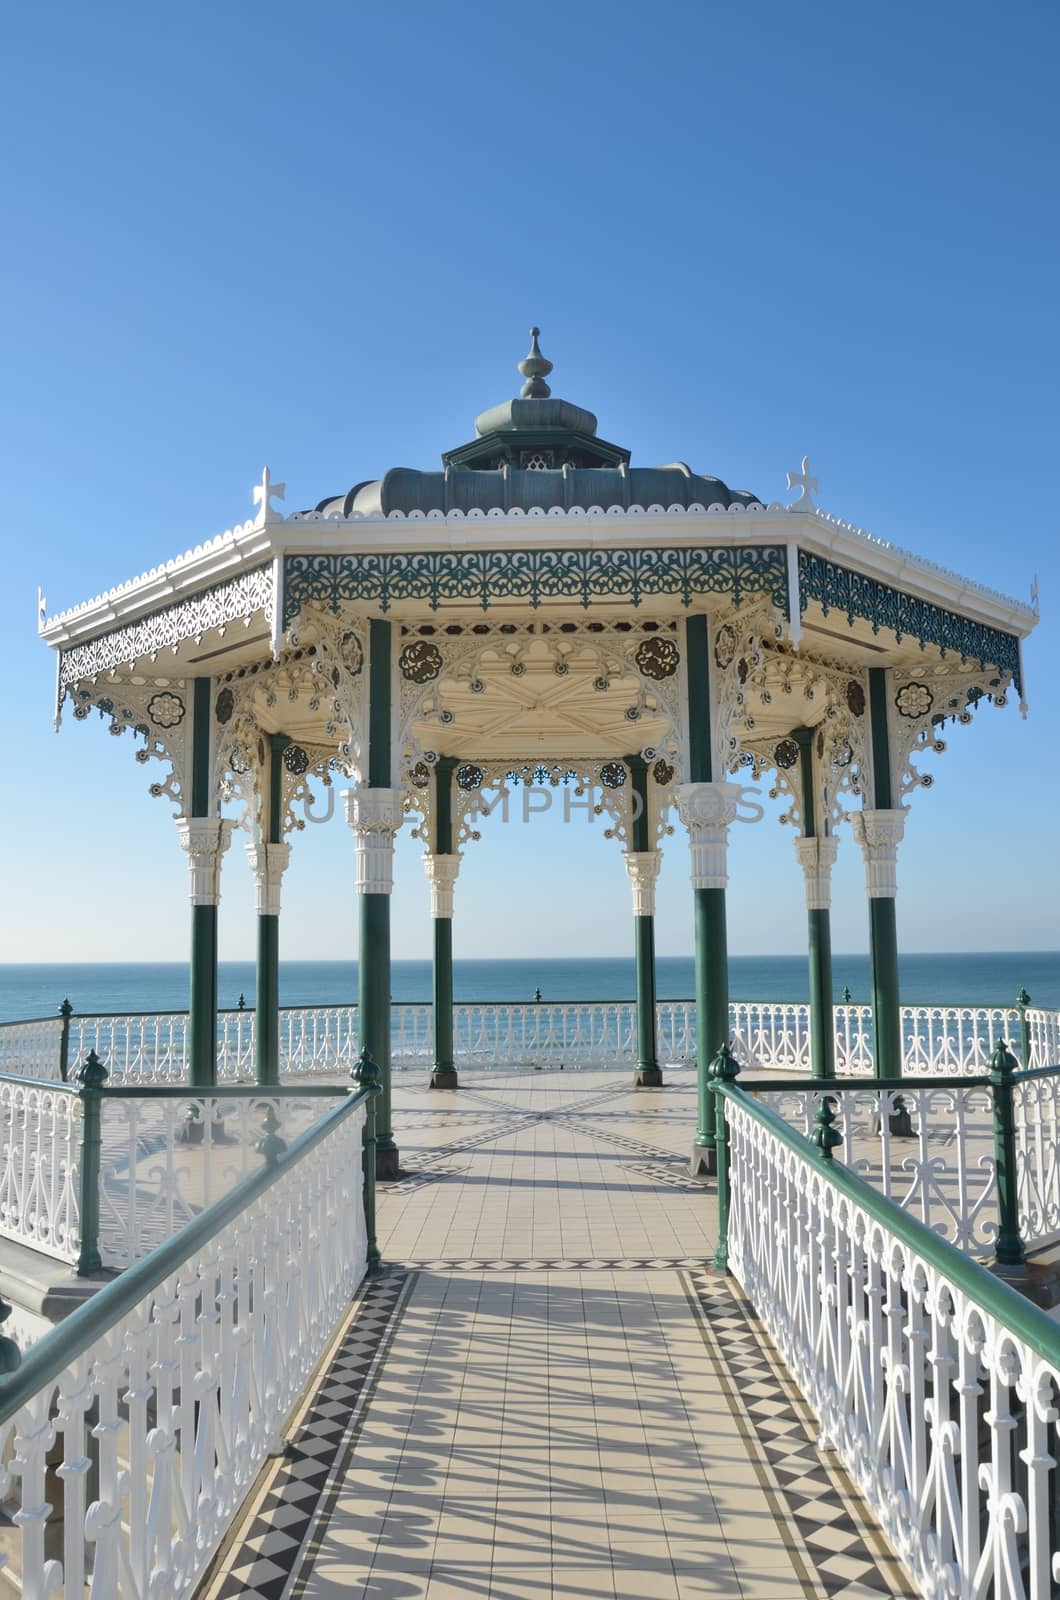 Seaside bandstand from front